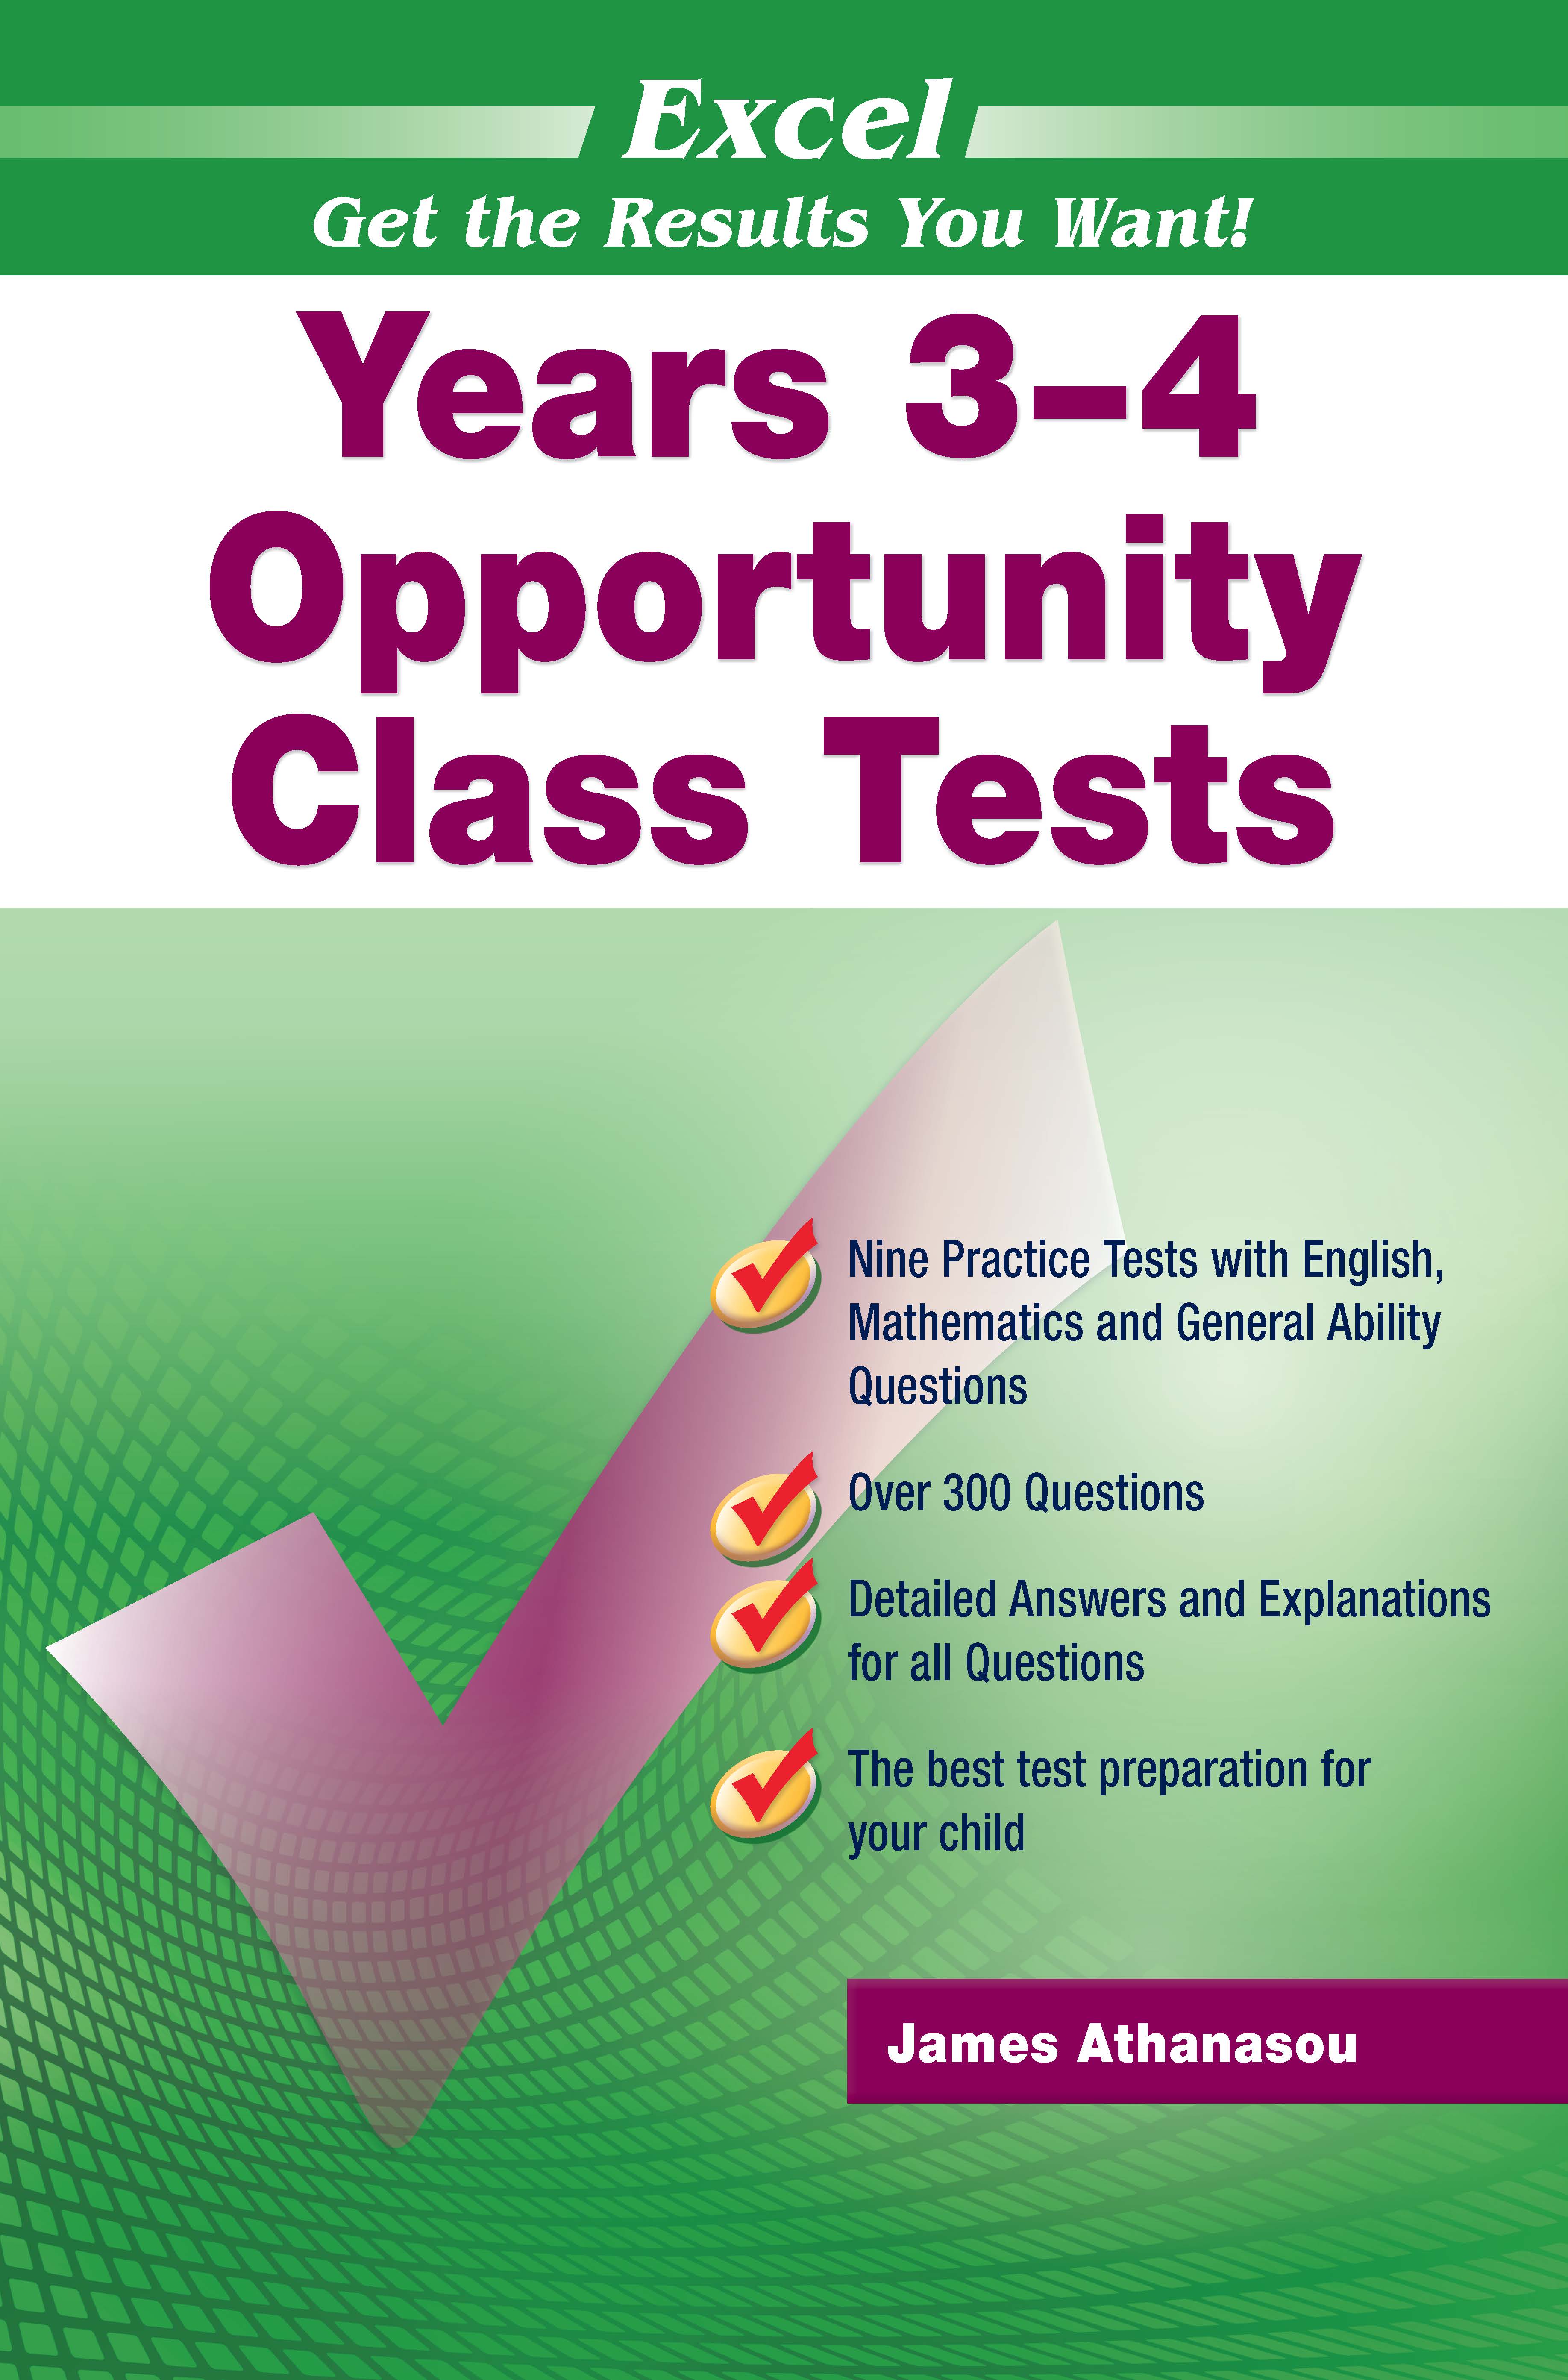 Picture of Excel Opportunity Class Tests Years 3-4